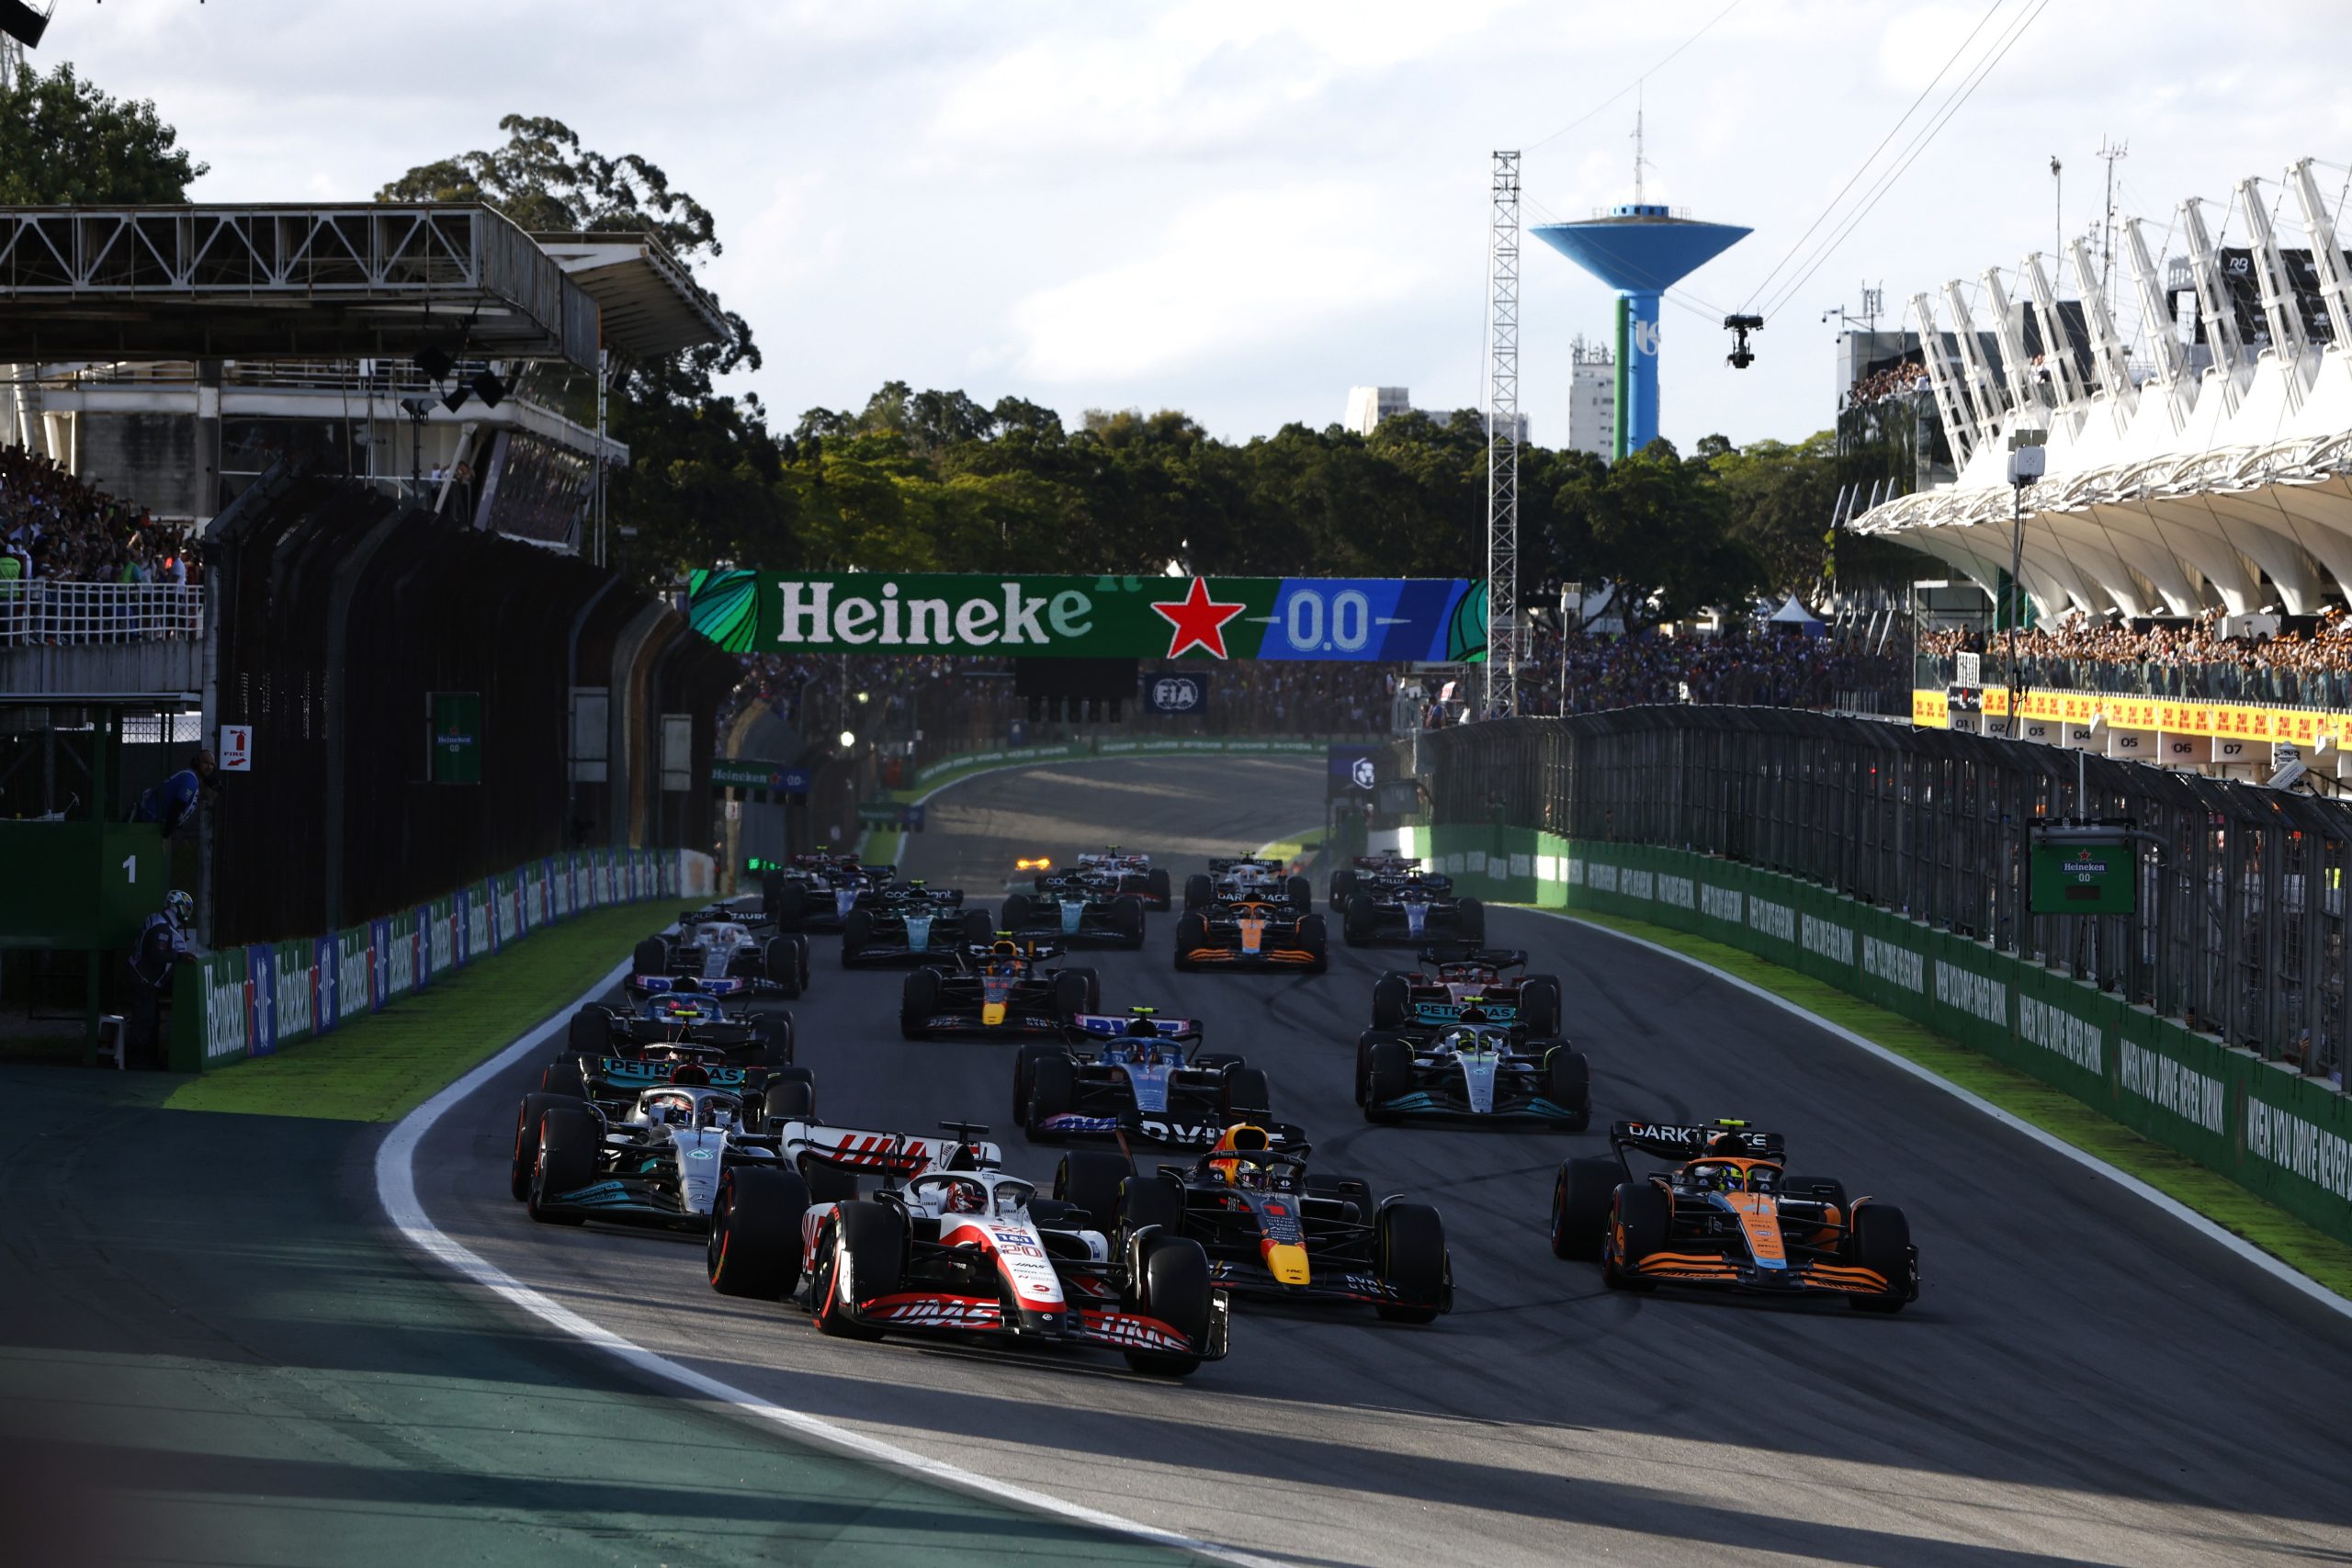 F1 Sprint Race - AUTóDROMO JOSé CARLOS PACE, BRAZIL - NOVEMBER 12: Kevin Magnussen, Haas VF-22, leads Max Verstappen, Red Bull Racing RB18, Lando Norris, McLaren MCL36, George Russell, Mercedes W13, Esteban Ocon, Alpine A522, and the rest of the field at the start during the São Paulo GP at Autódromo José Carlos Pace on Saturday November 12, 2022 in Sao Paulo, Brazil. (Photo by Zak Mauger / LAT Images)